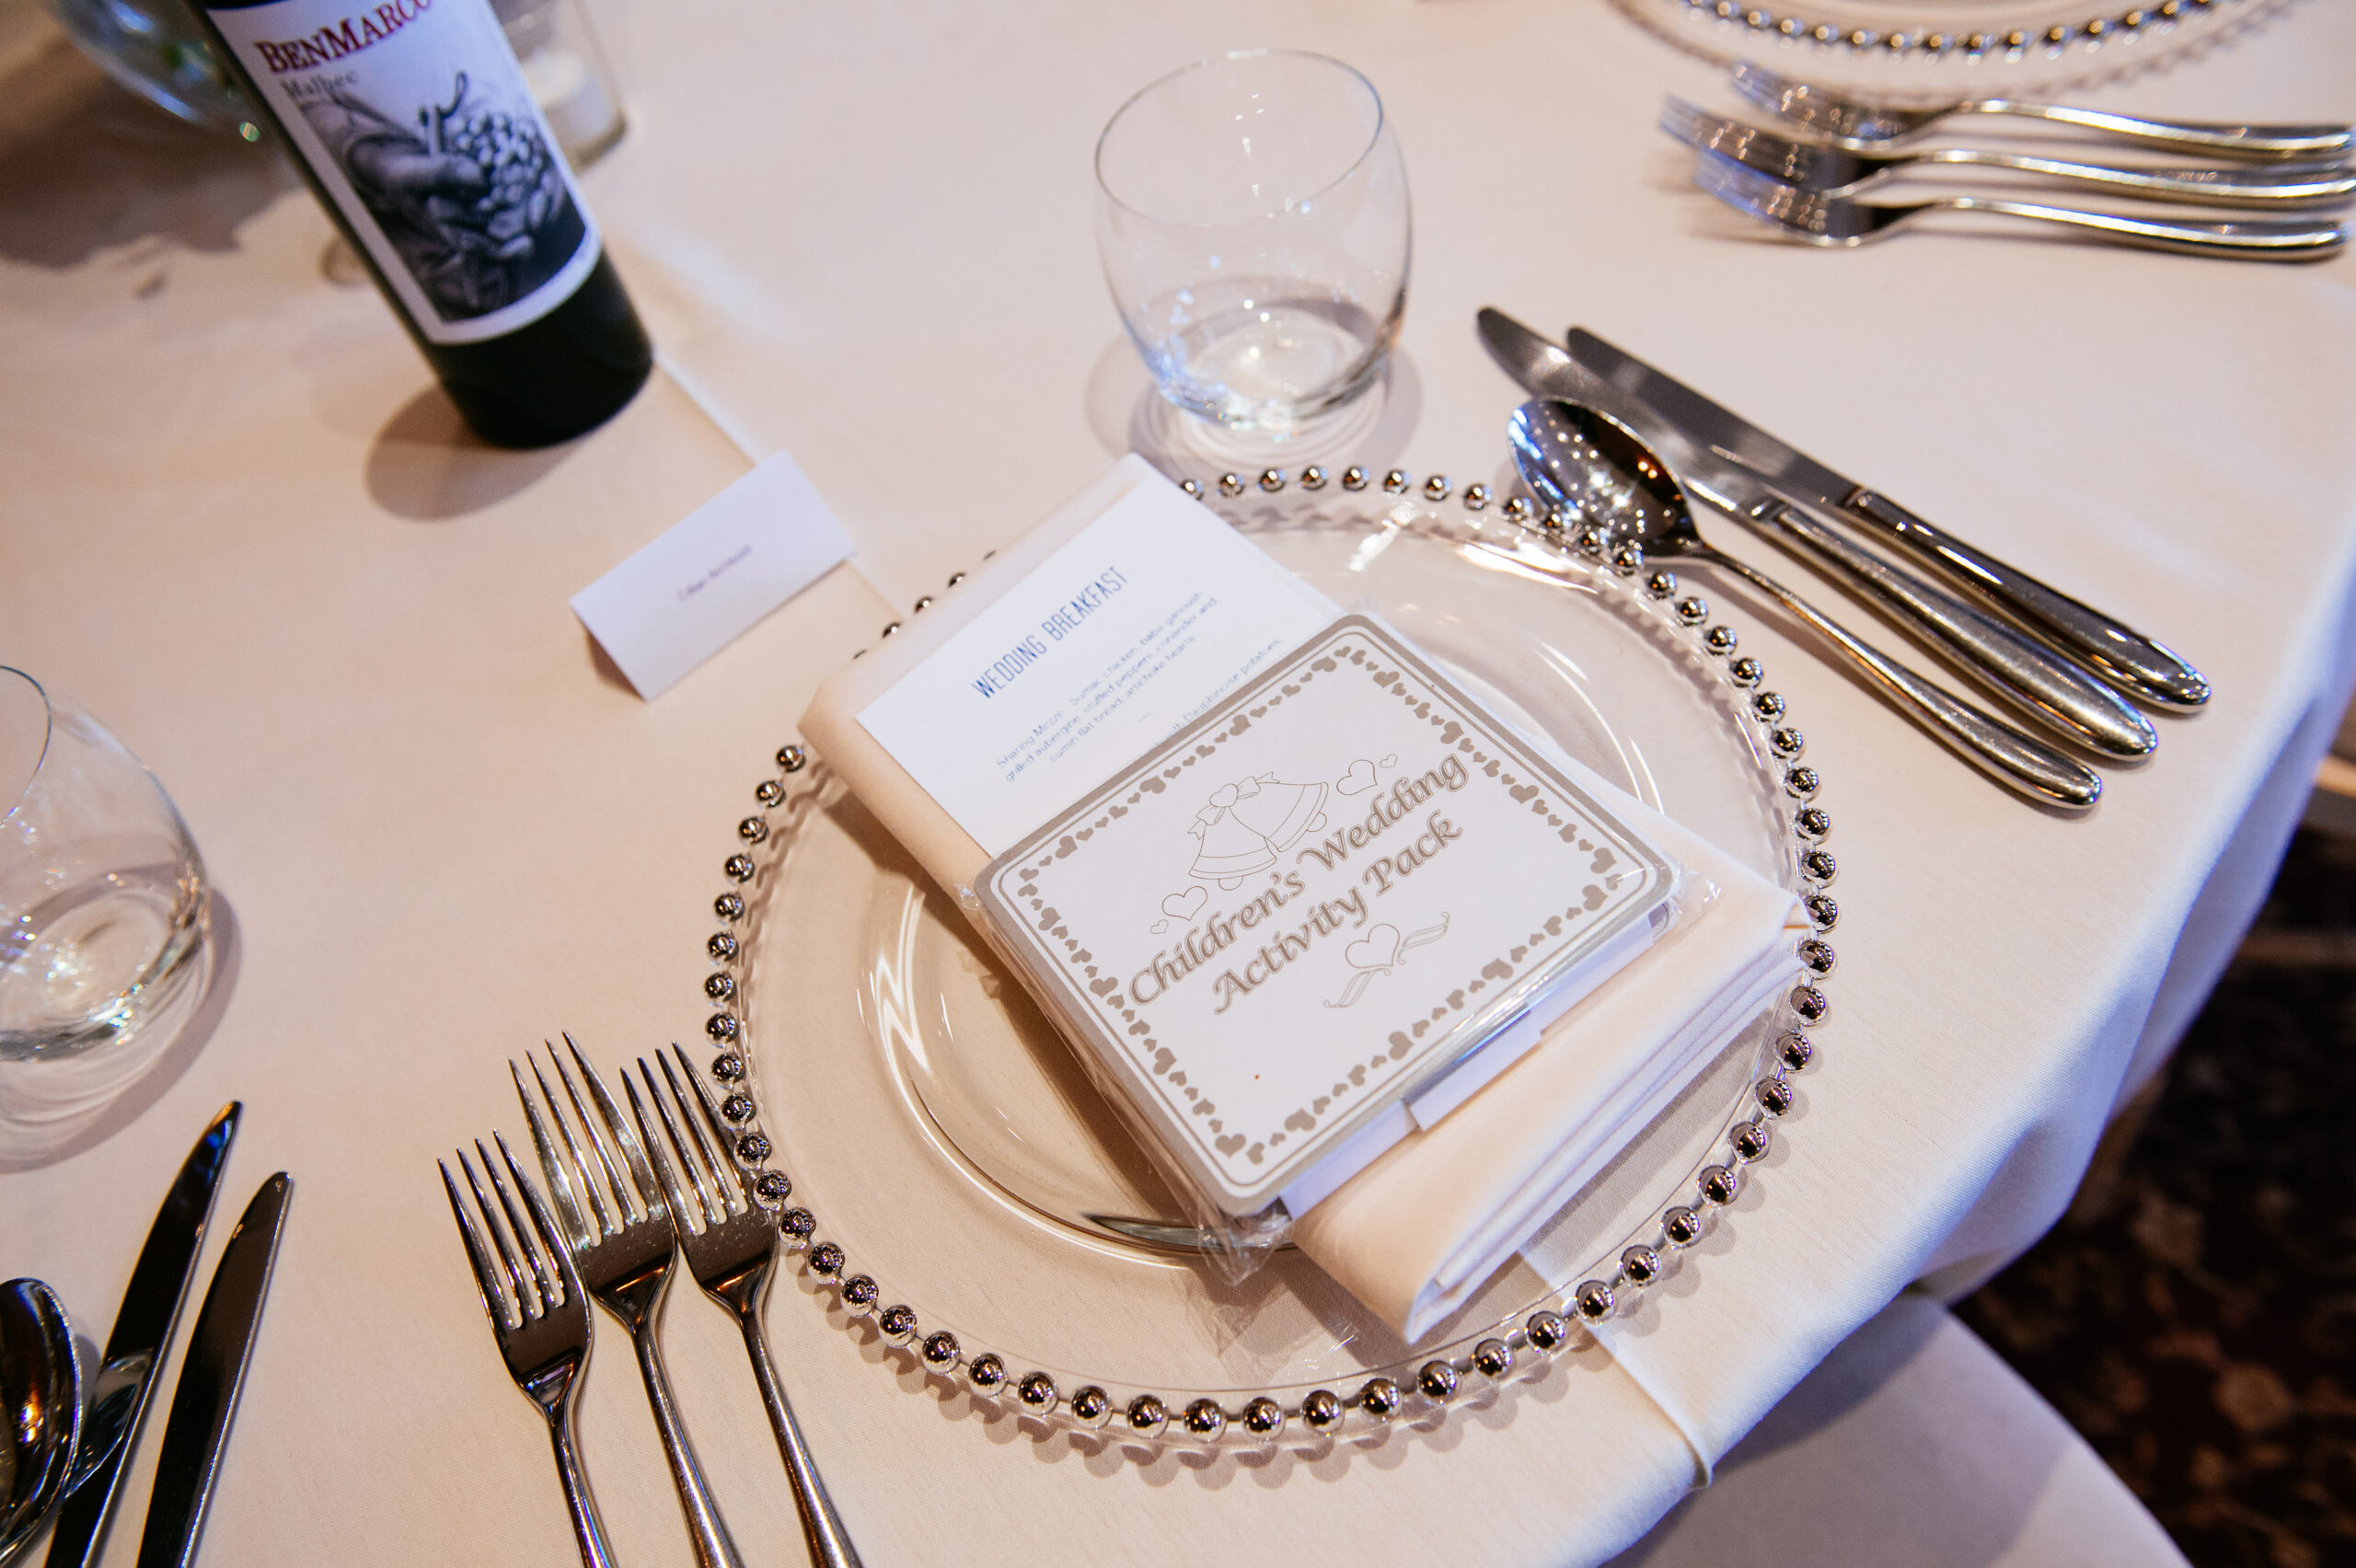 Bridebook.co.uk- wedding menu to match invitations laid out on a plate